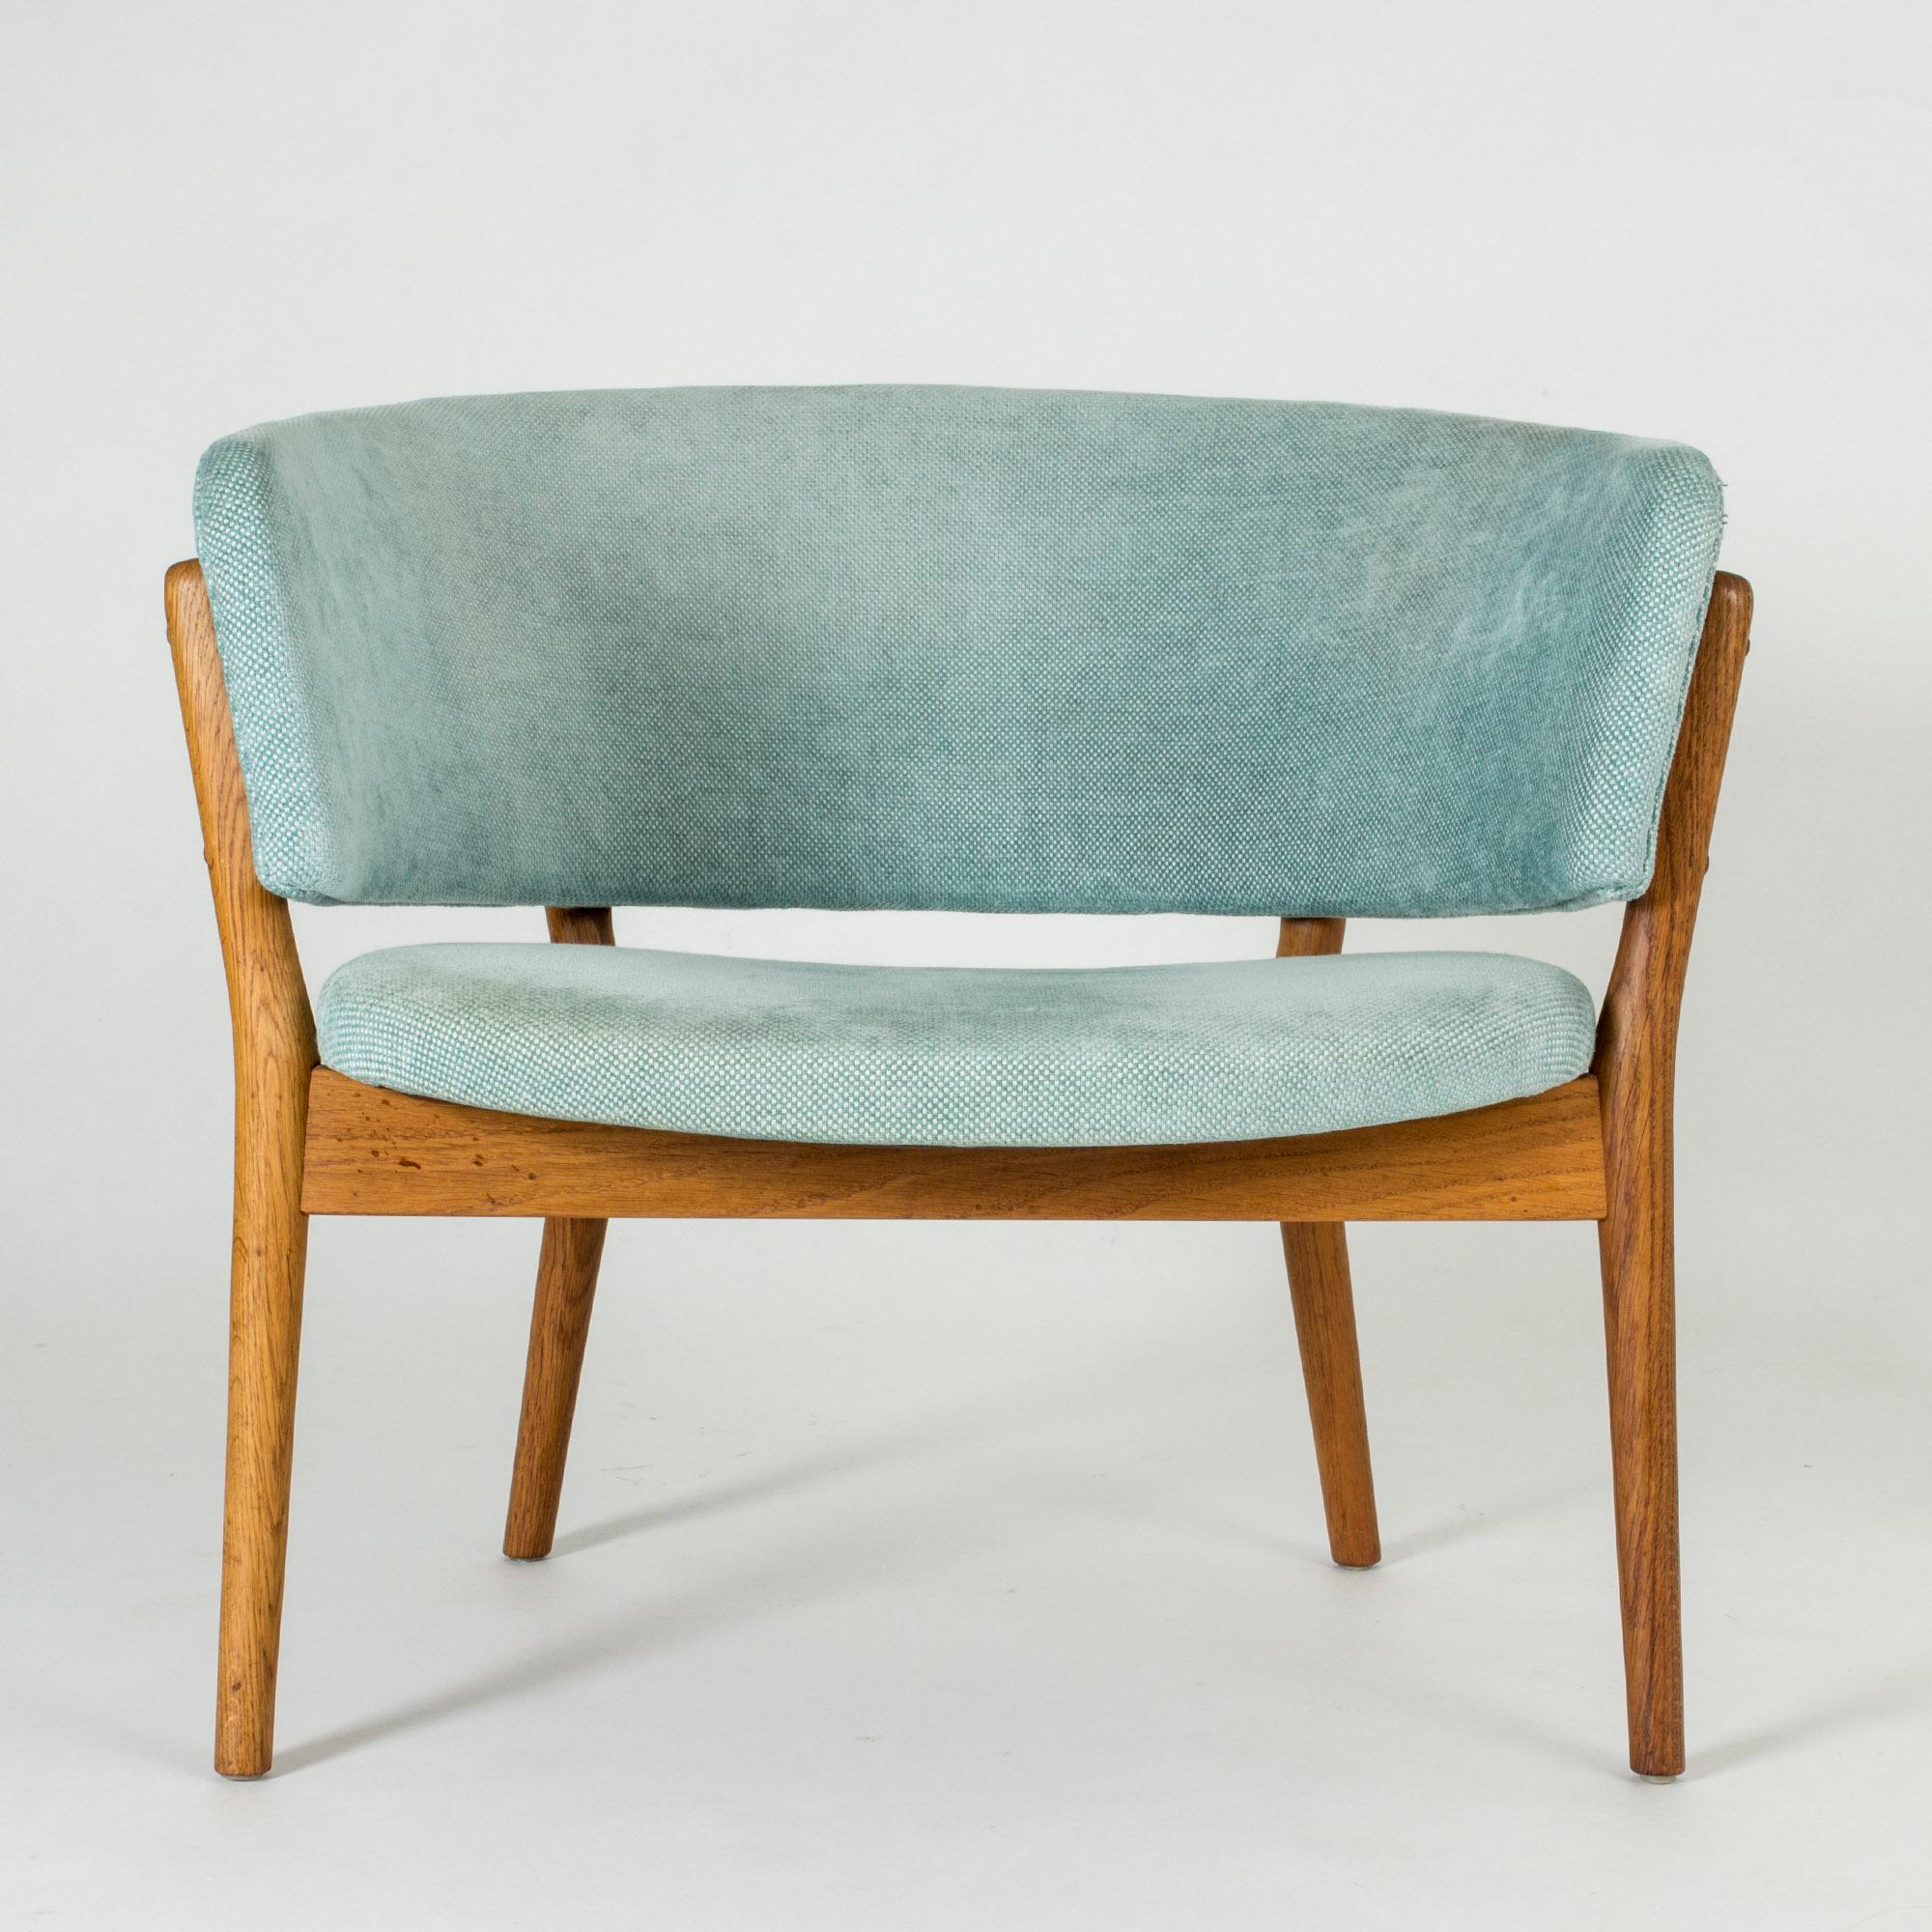 Mid-20th Century Pair of “ND 83” Lounge Chairs by Nanna Ditzel for Søren Willadsen